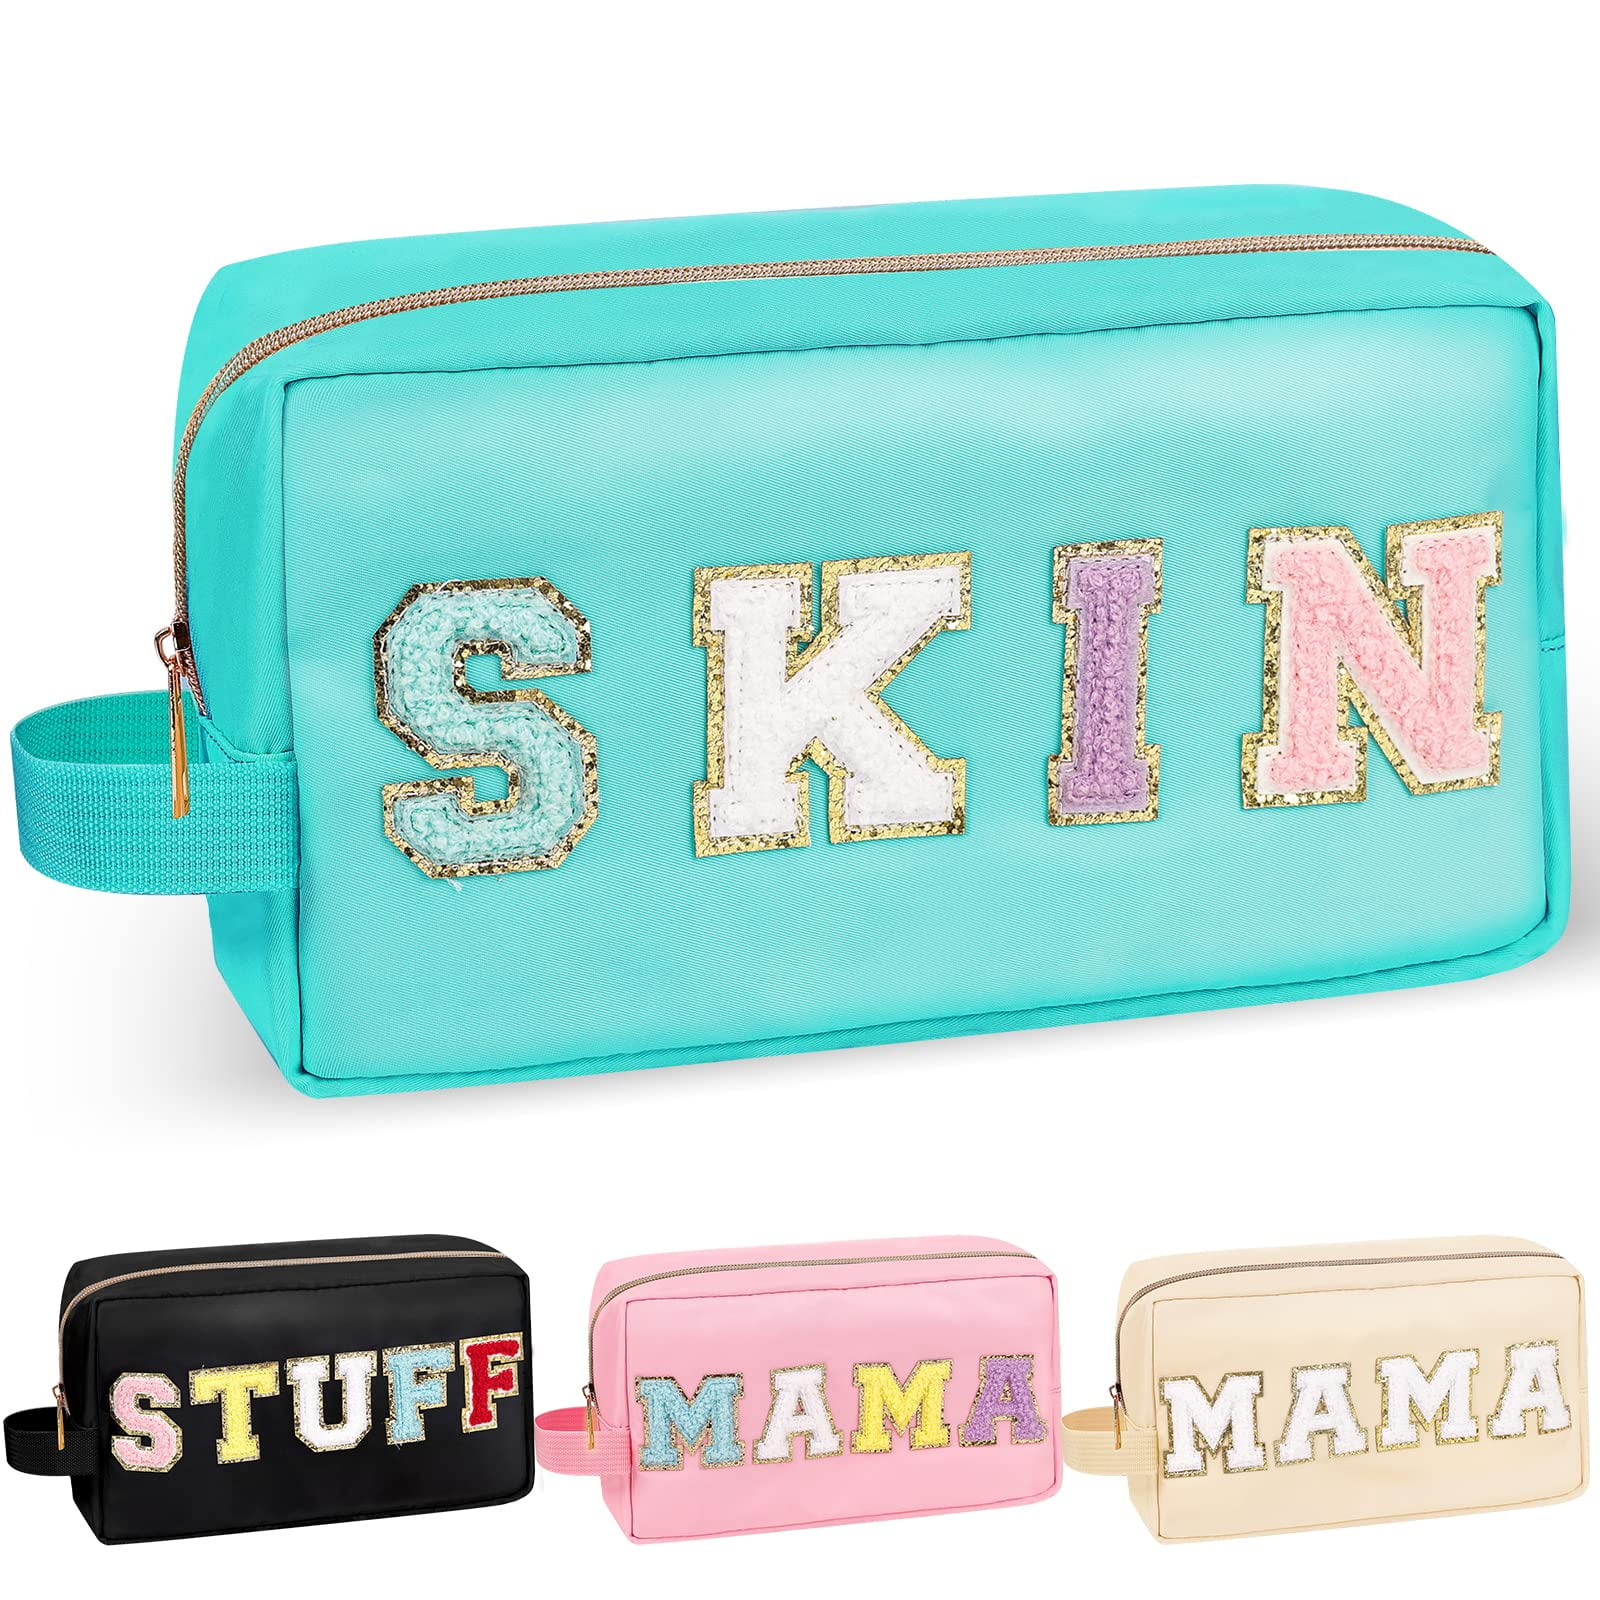 Sanwuta 4 Pcs Chenille Preppy Makeup Bag Portable Monogram Cosmetic Bag  with Keychain Bracelet Pu Leather Waterproof Toiletry Bag Cute Pouches for